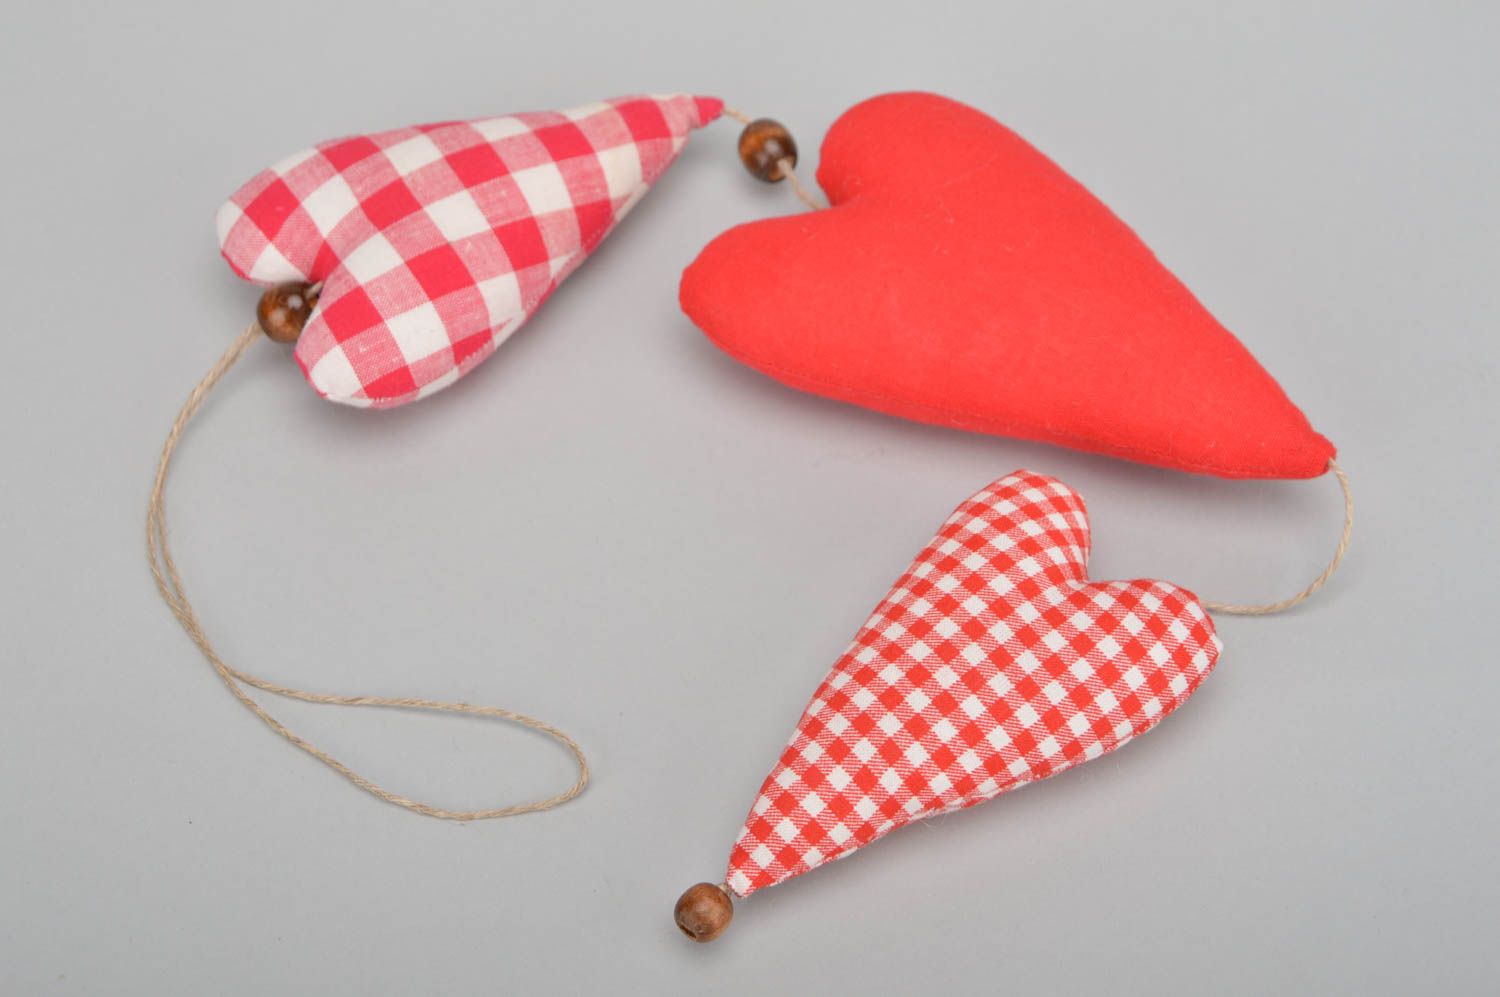 Set of 3 homemade designer textile soft hearts red and checkered for wall decor photo 2